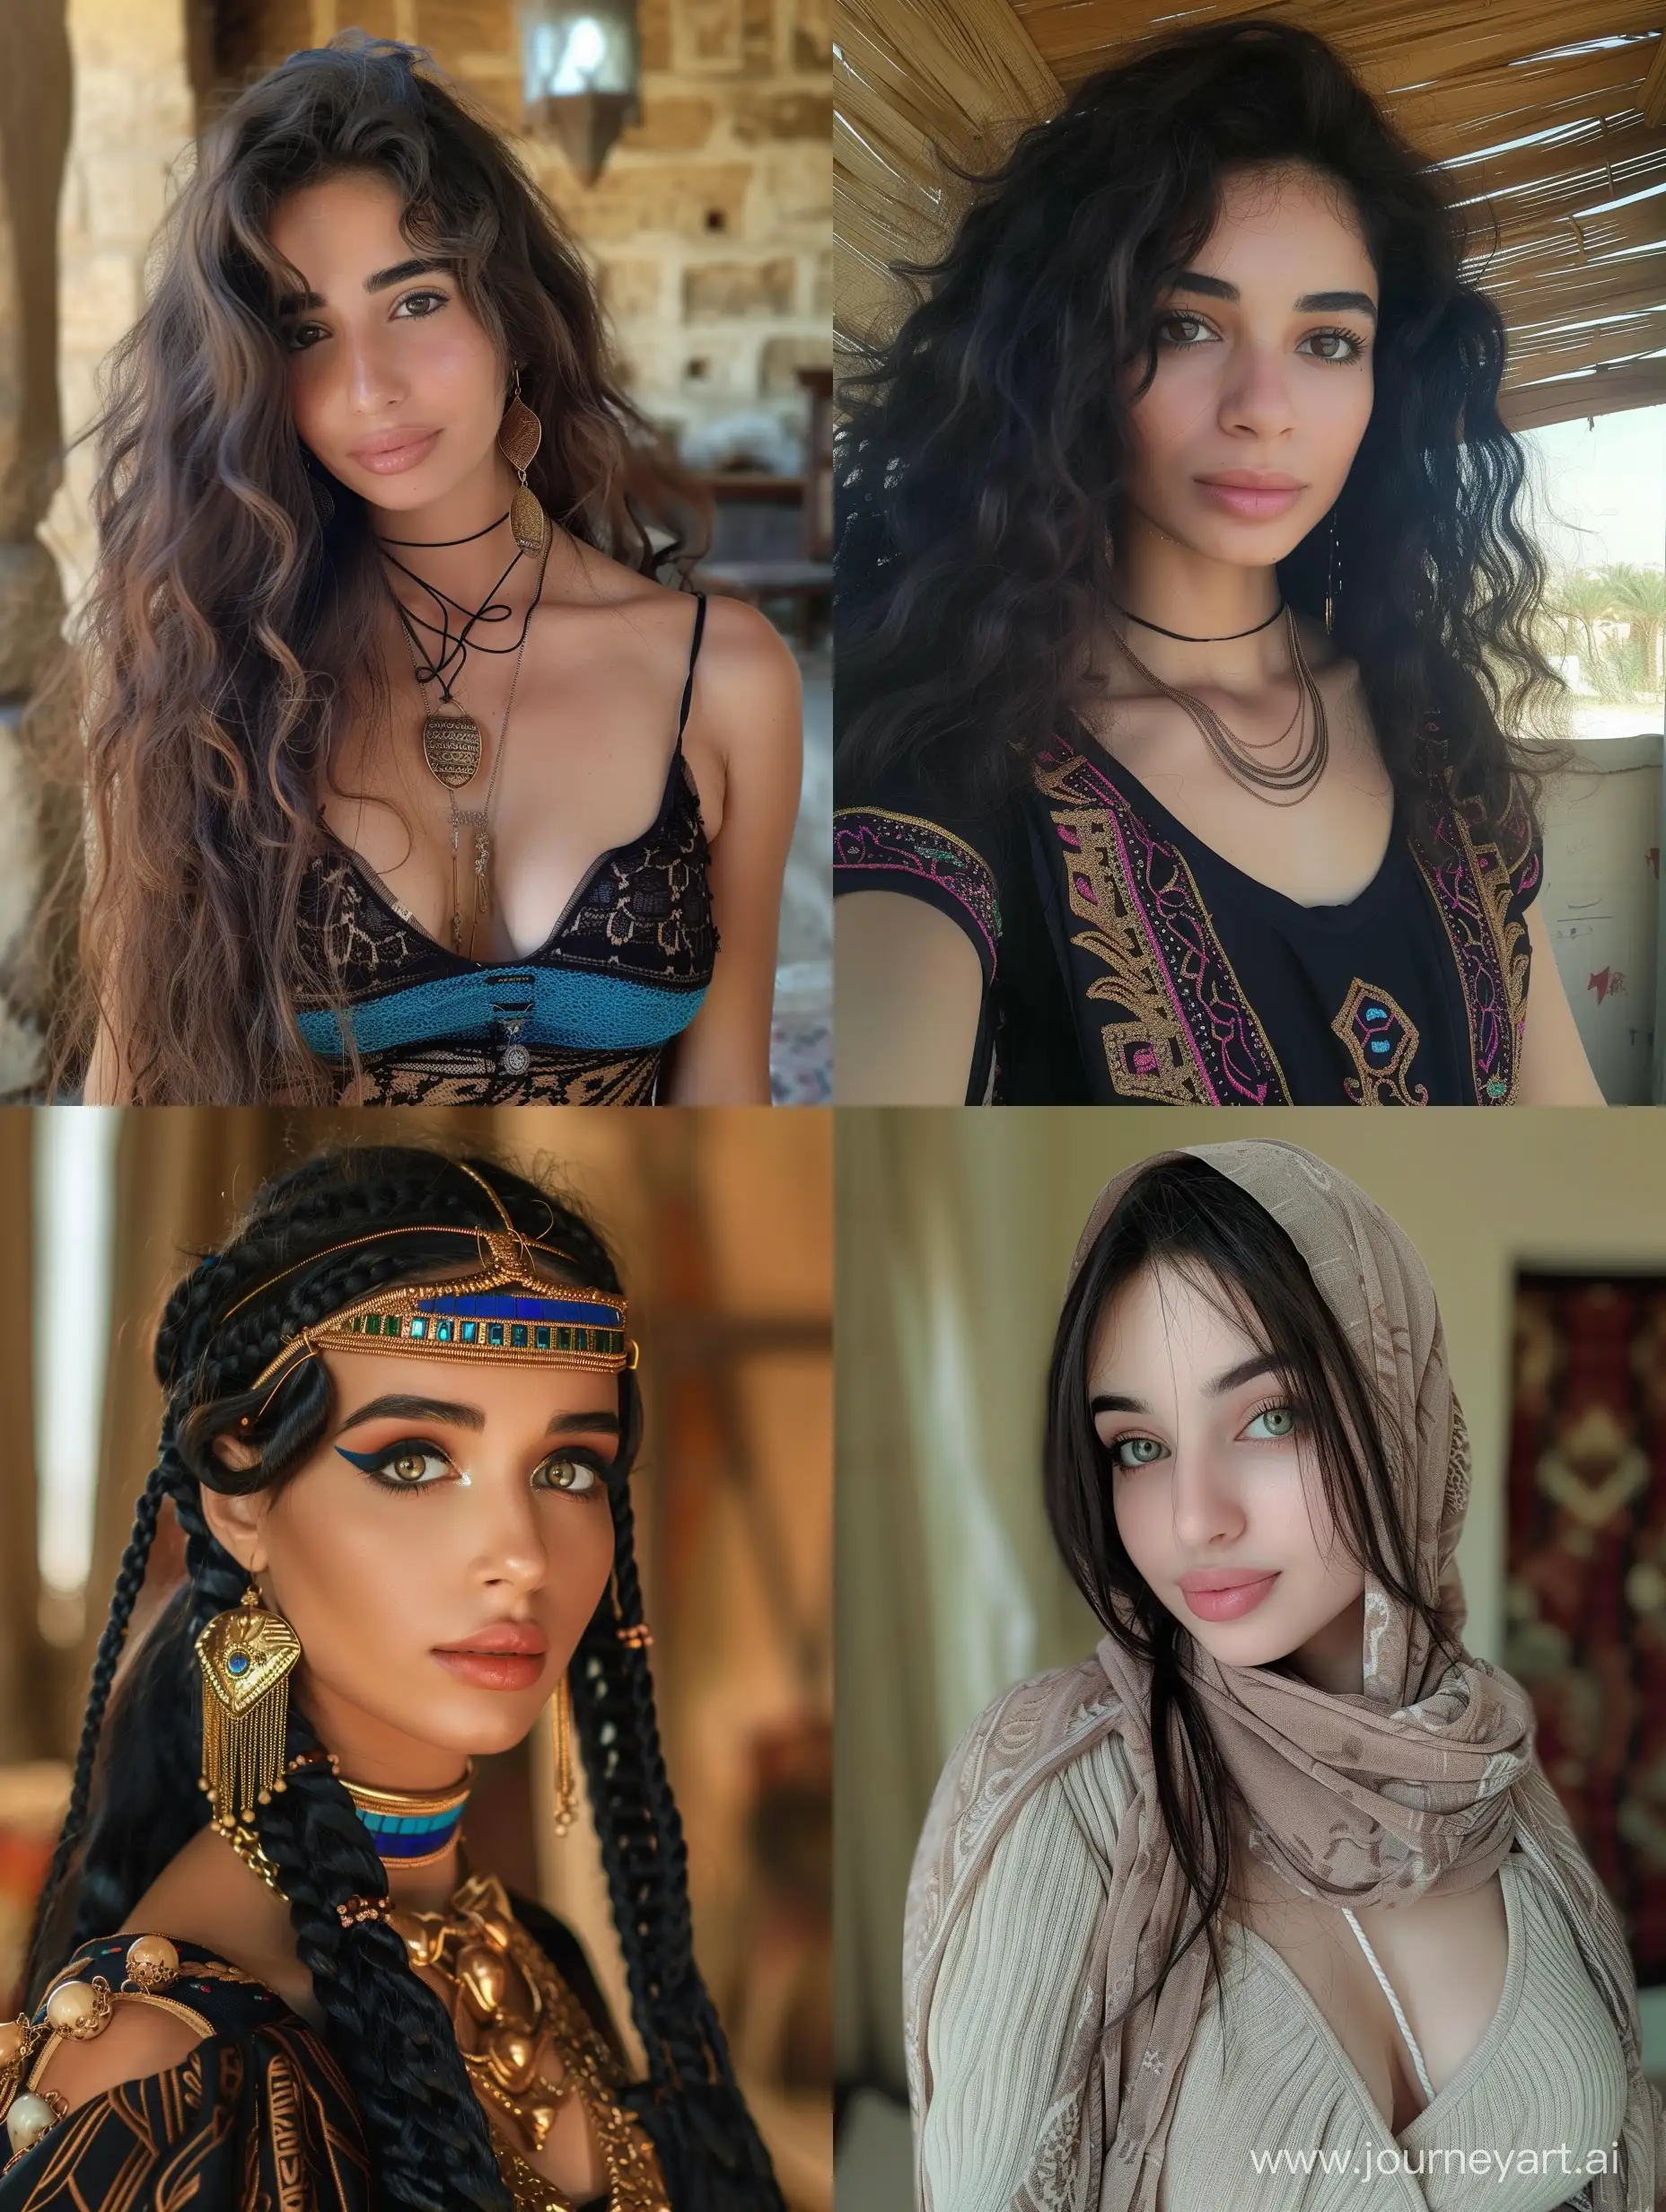 A very beautiful Egyptian girl 26 years old